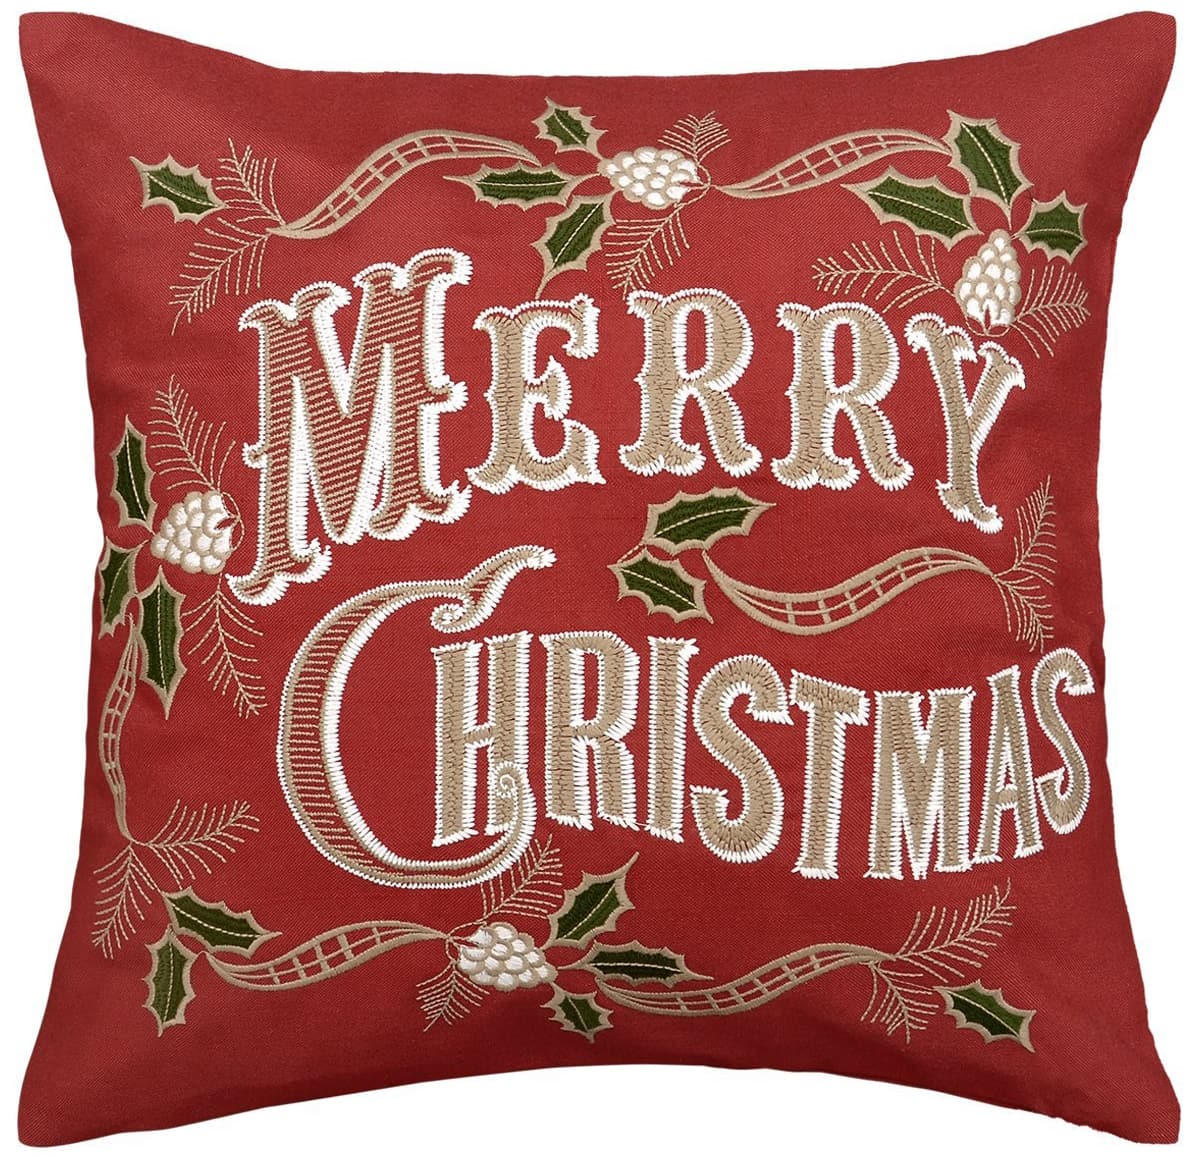 Merry Christmas red pillow.